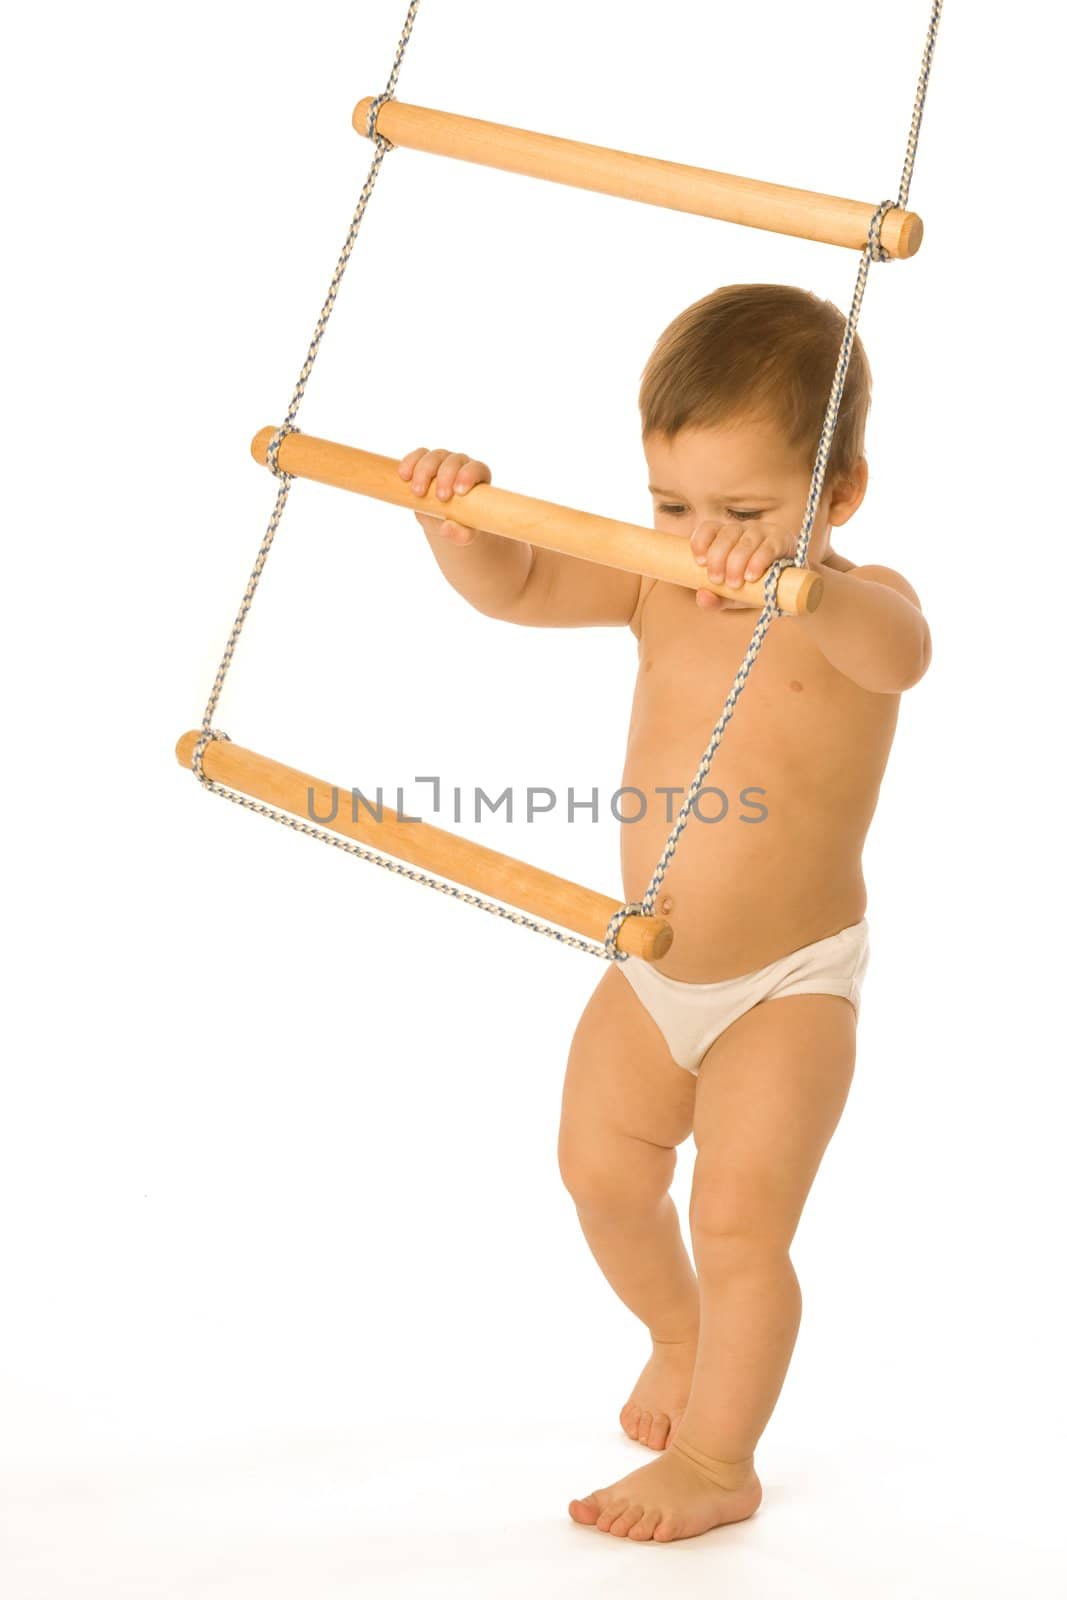 A little boy trying to climb a rope-ladder